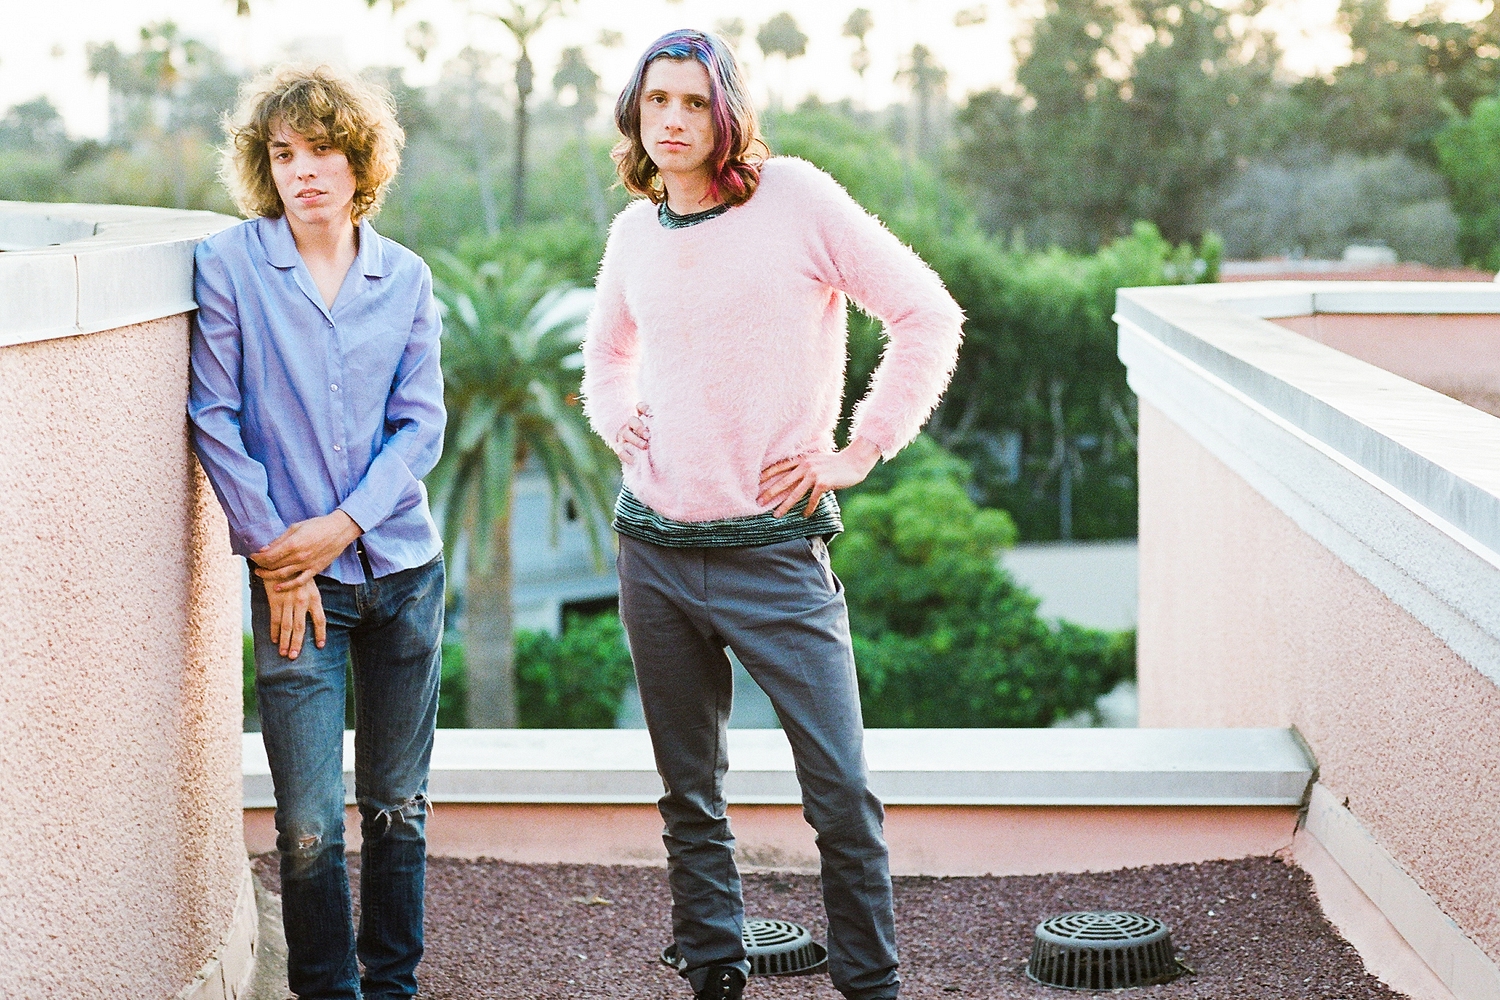 Foxygen just shared a teaser for something with a clip of new music